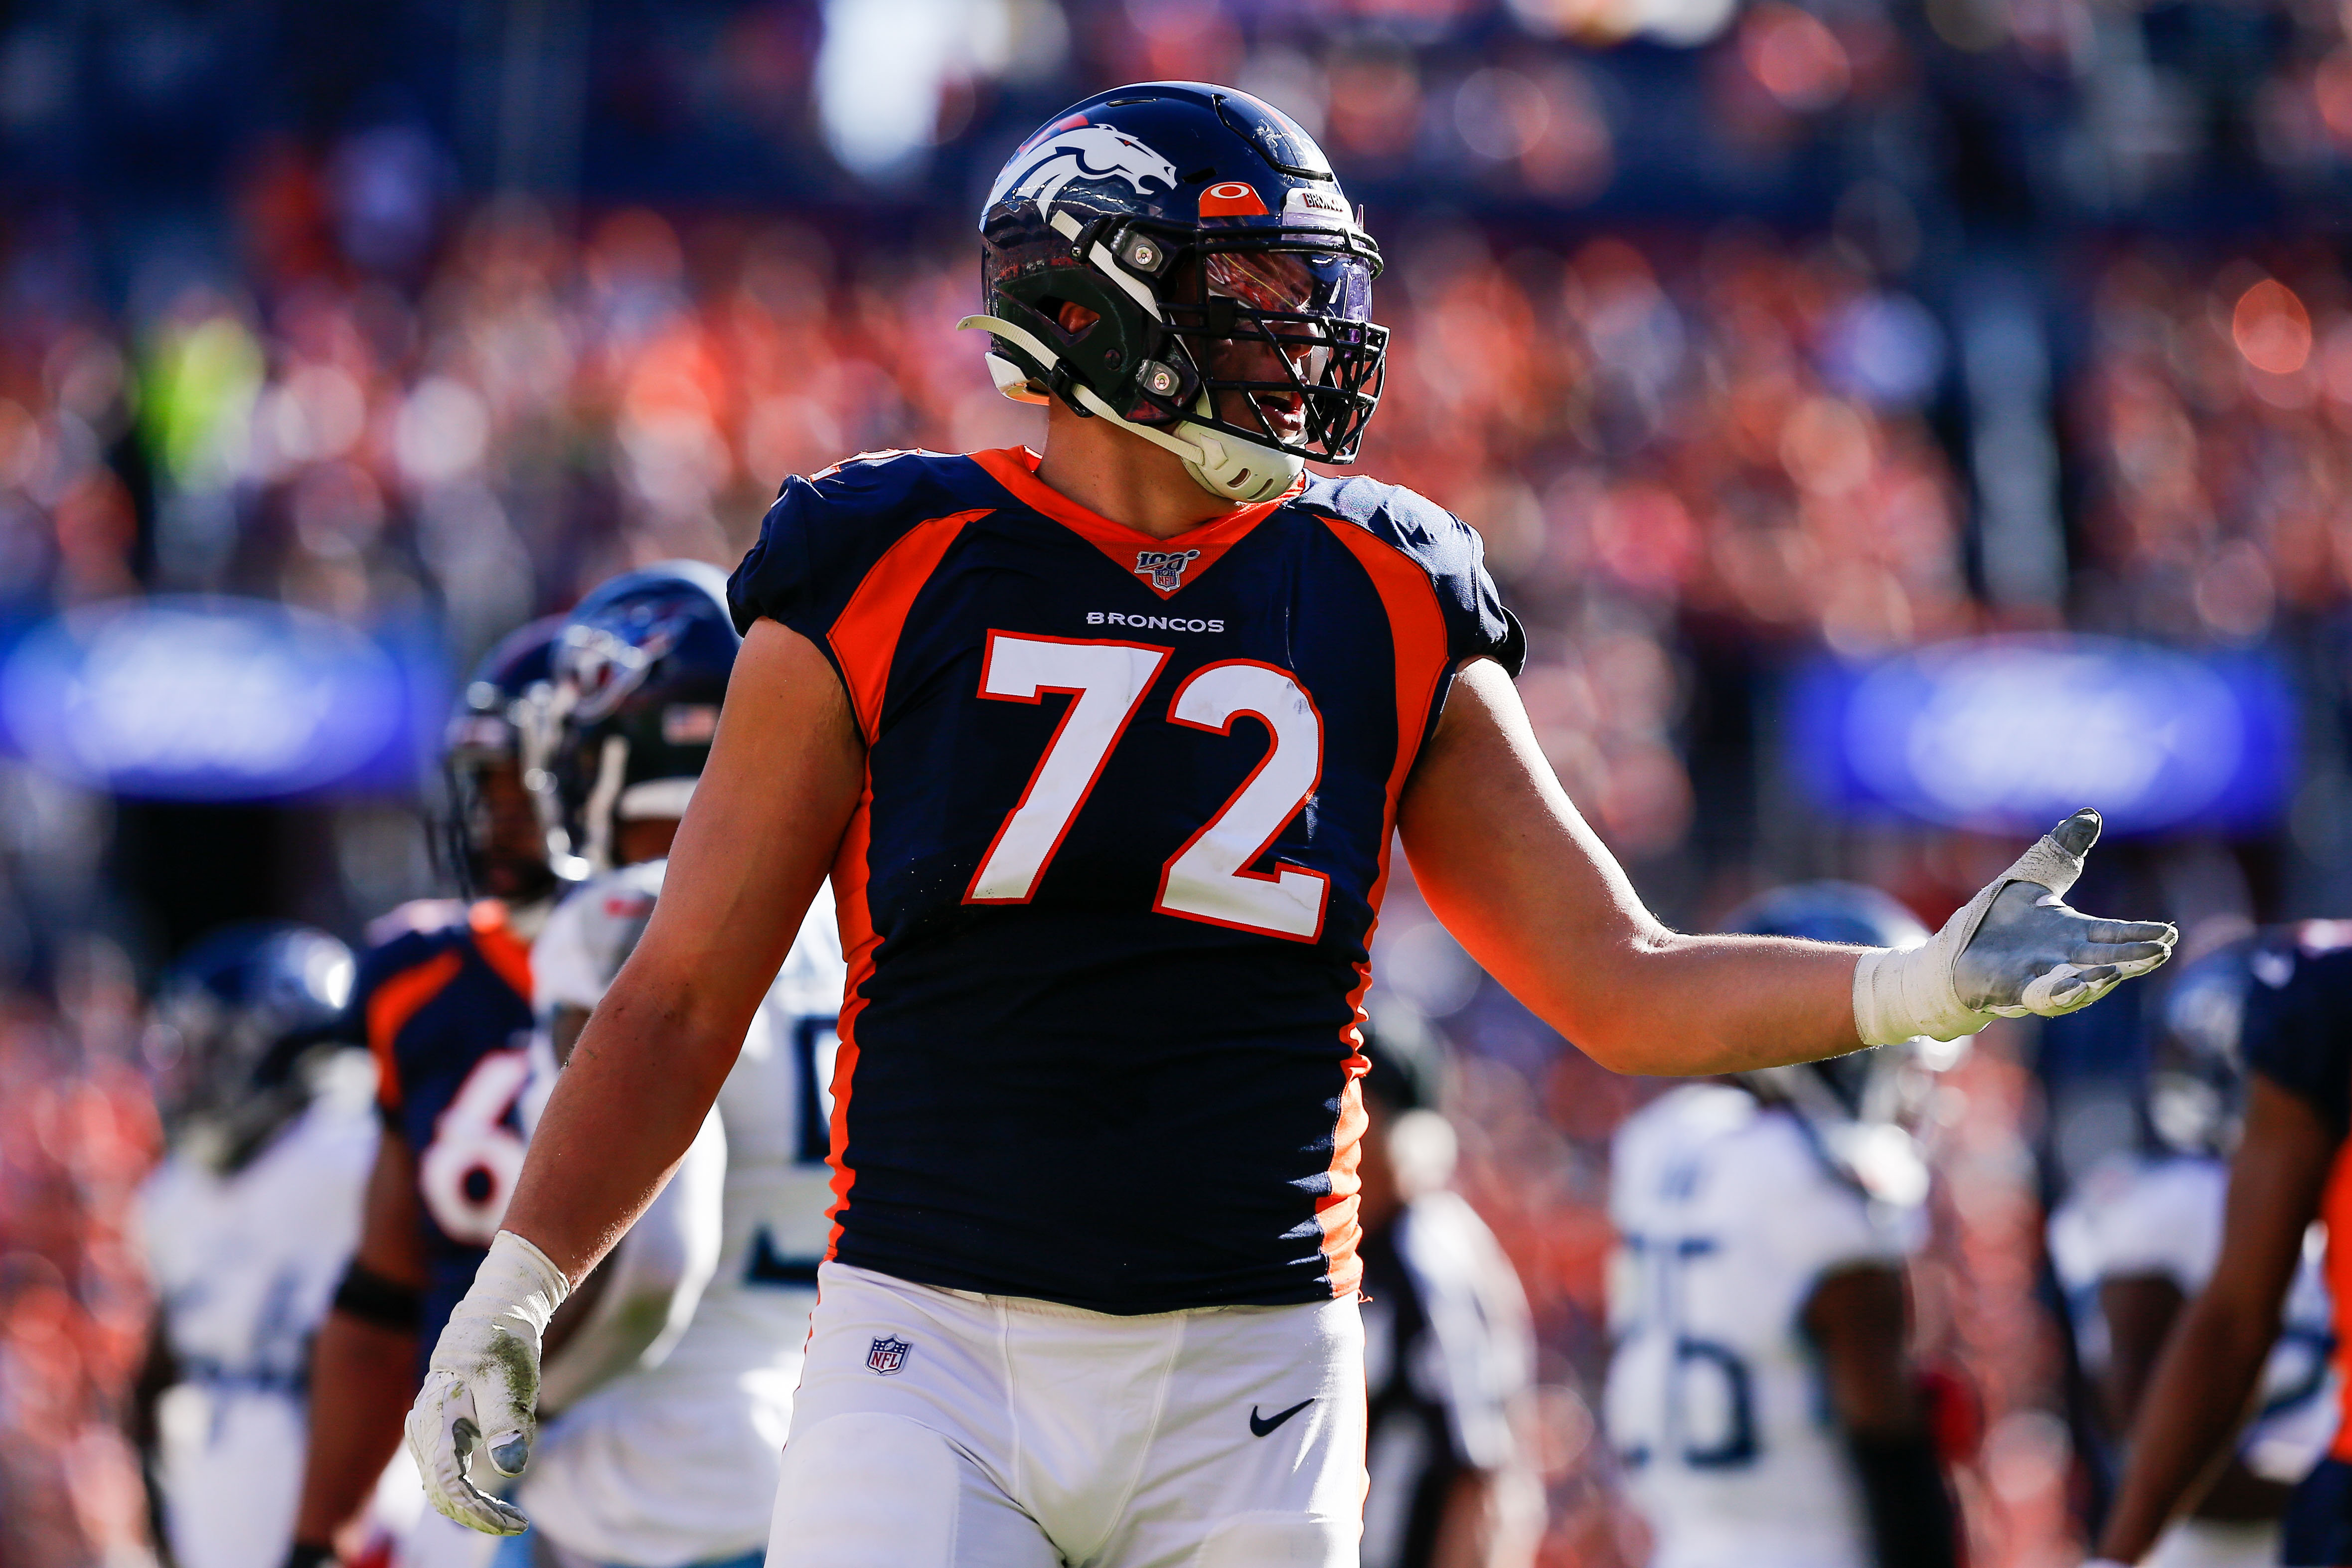 Denver Broncos offensive tackle Garett Bolles (72) reacts after receiving a penalty in the second quarter against the Tennessee Titans at Empower Field at Mile High.